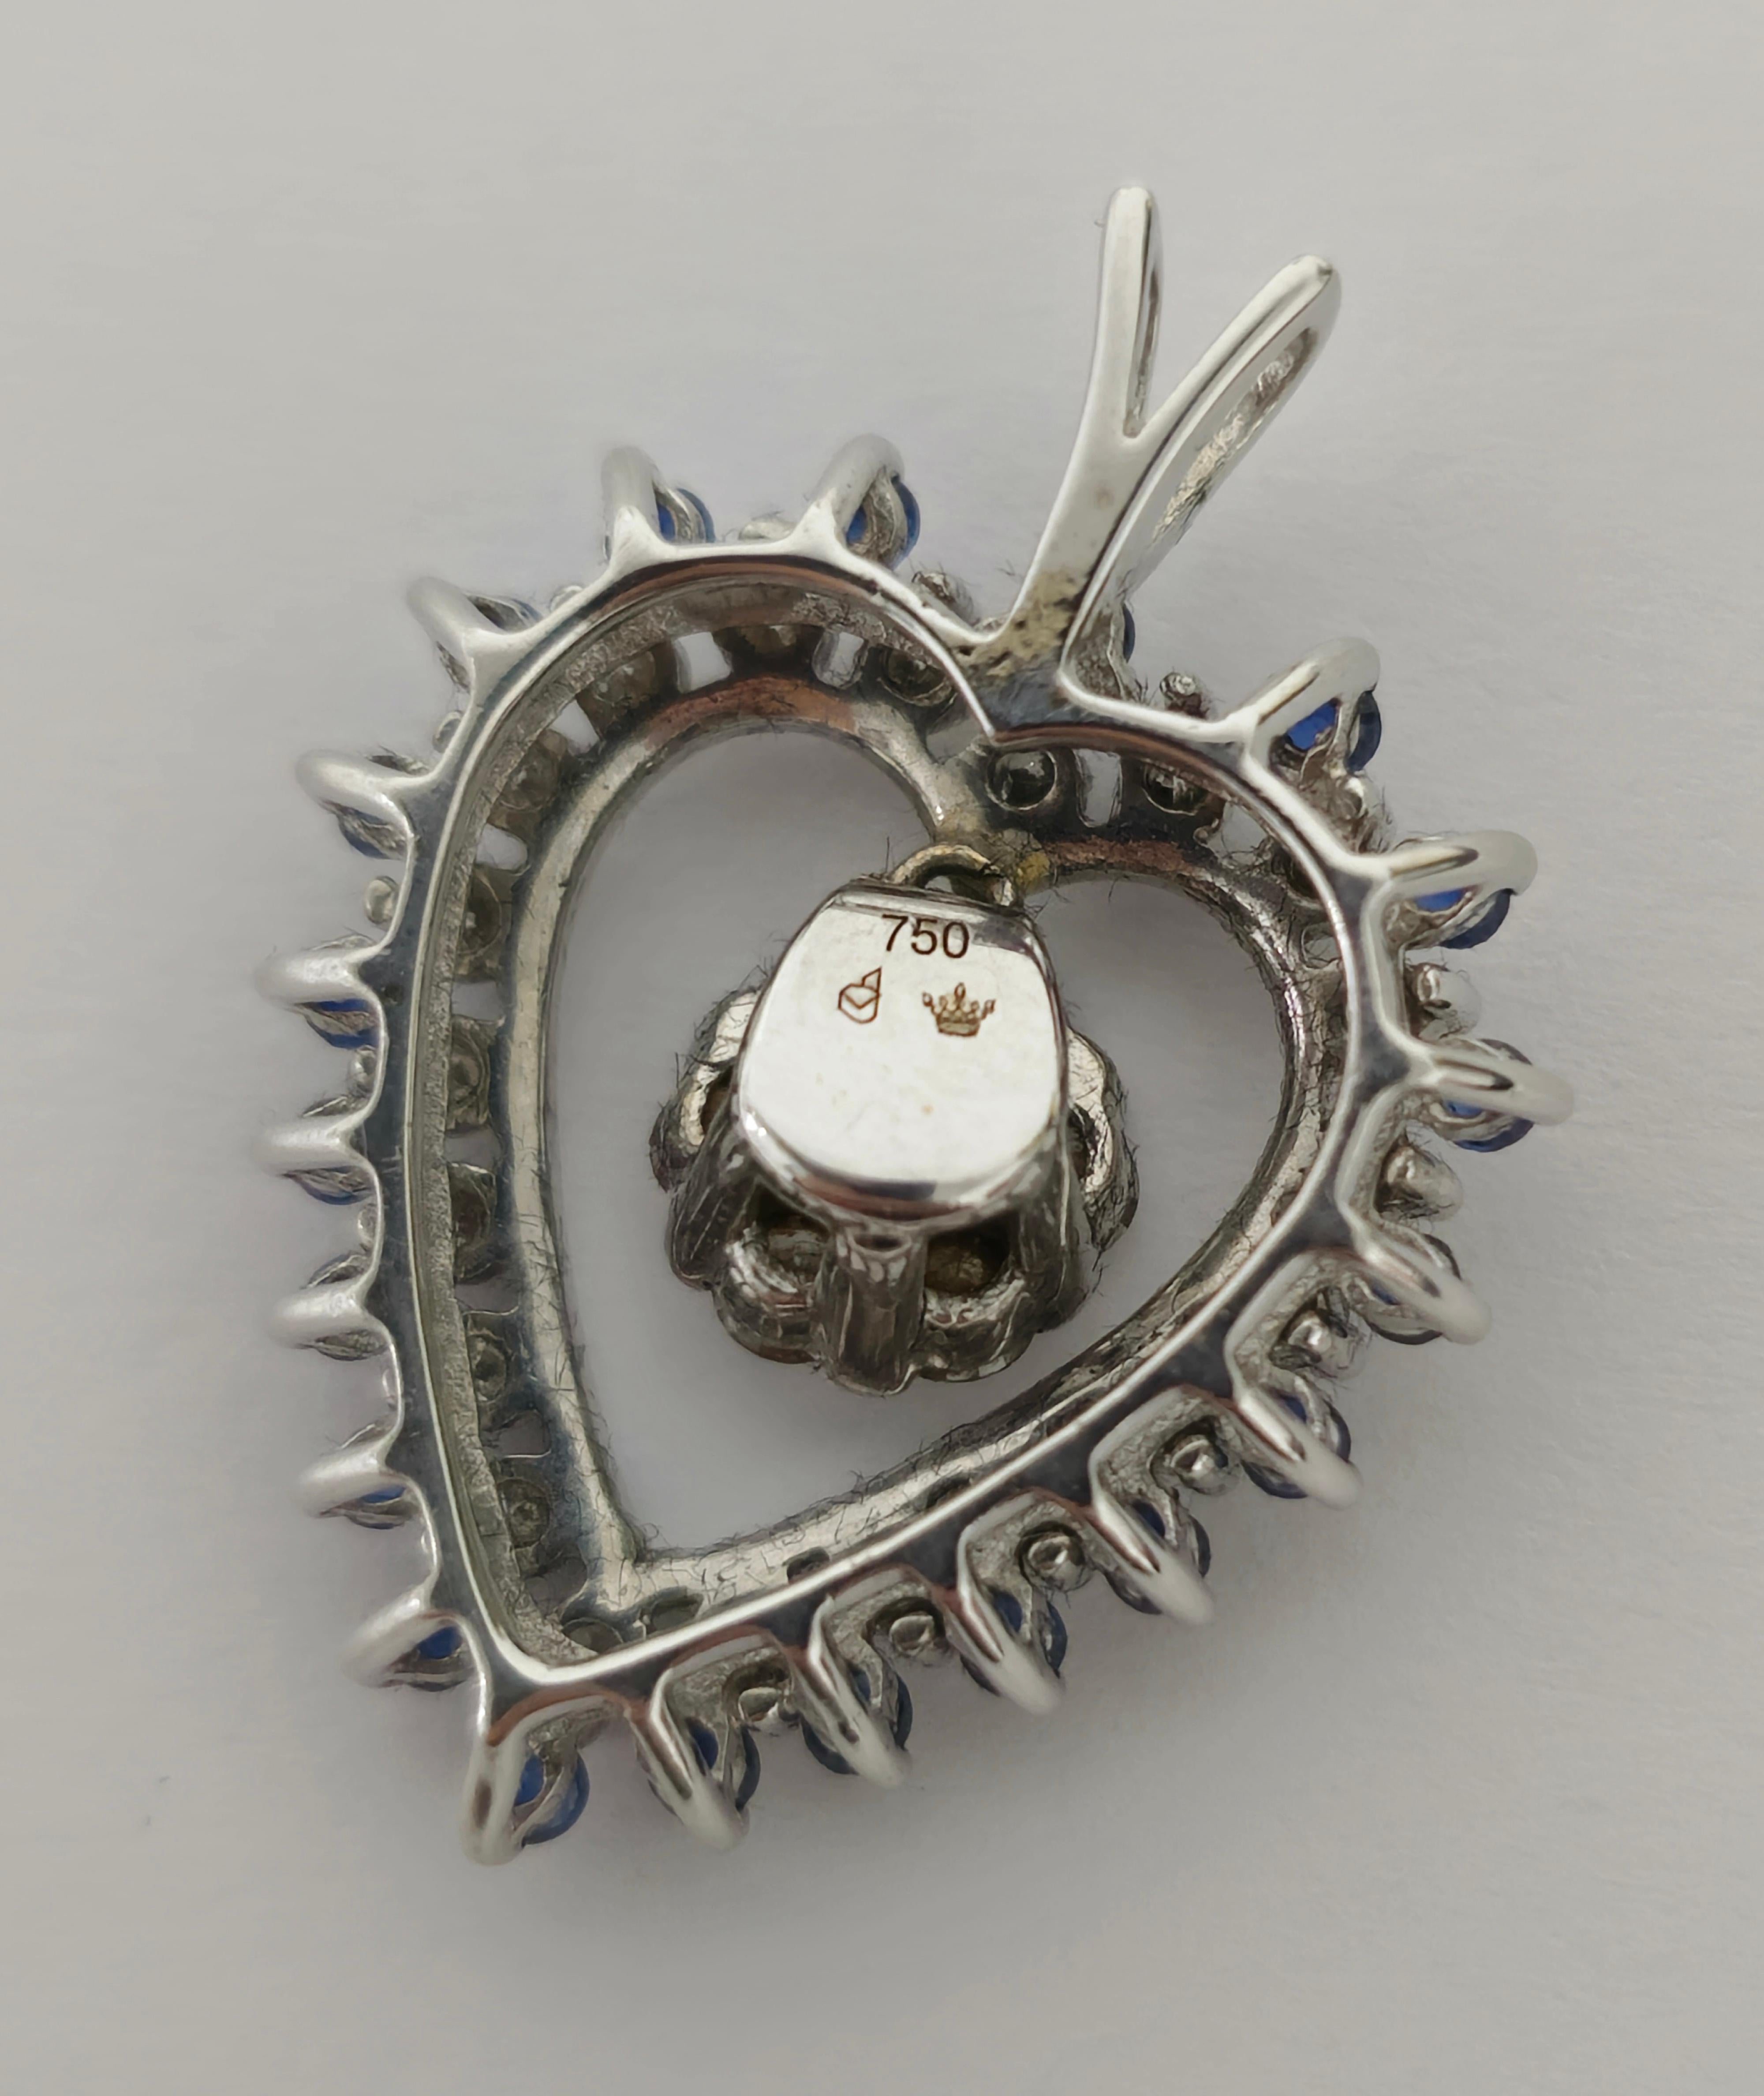 Crafted from 18k white gold, this pendant features a heart-shaped blue sapphire adorned with high-quality round brilliant-cut diamonds. The diamonds boast F color and VS clarity, ensuring exceptional brilliance and sparkle. With its elegant design